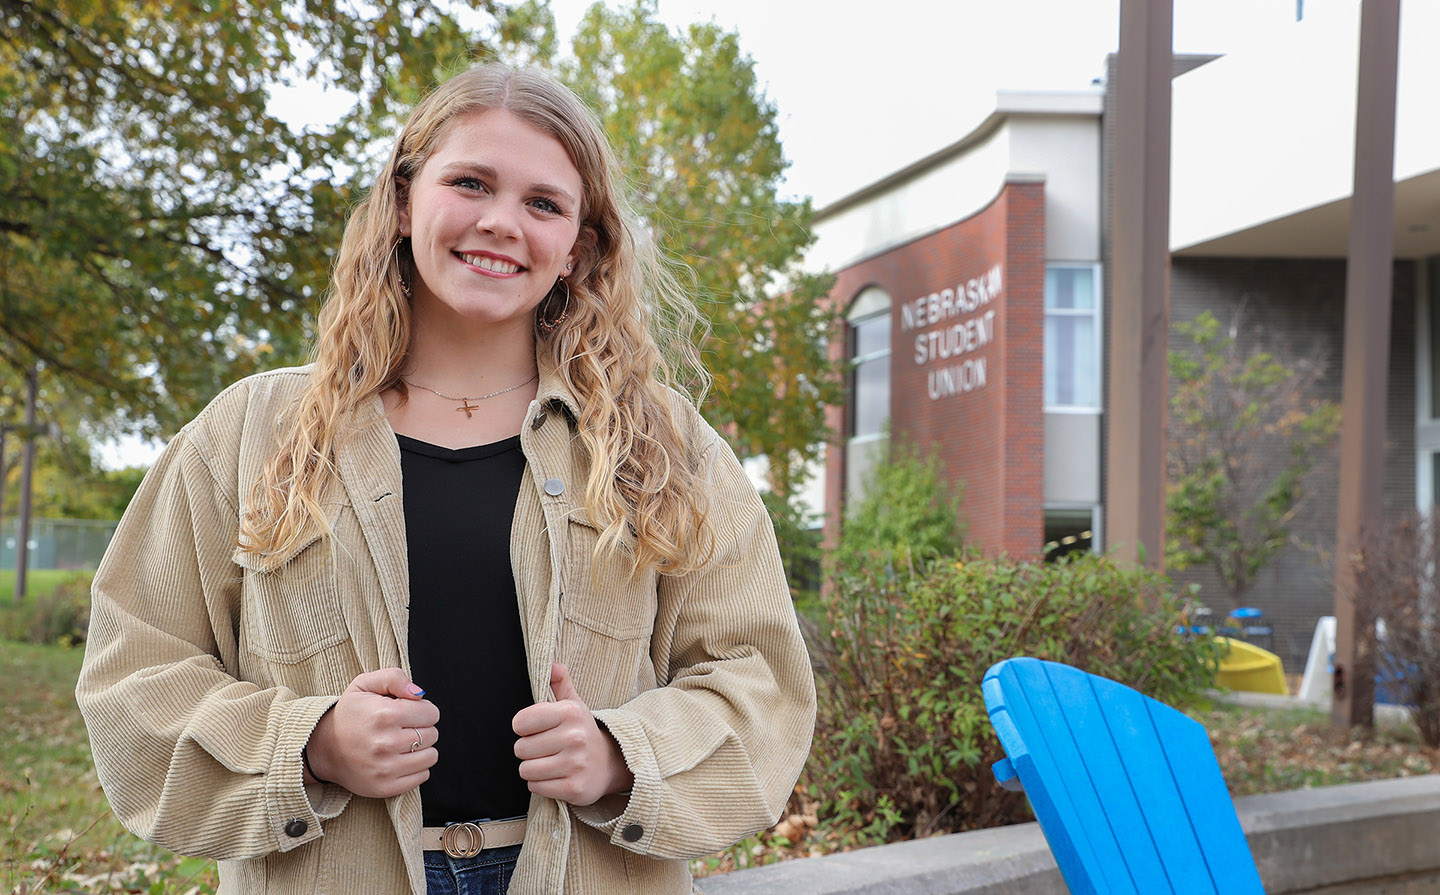 Holly Rockenbach is a senior at UNK, where she’s studying communication disorders with a special education minor. She plans to pursue a master’s degree in speech-language pathology after graduating in May.